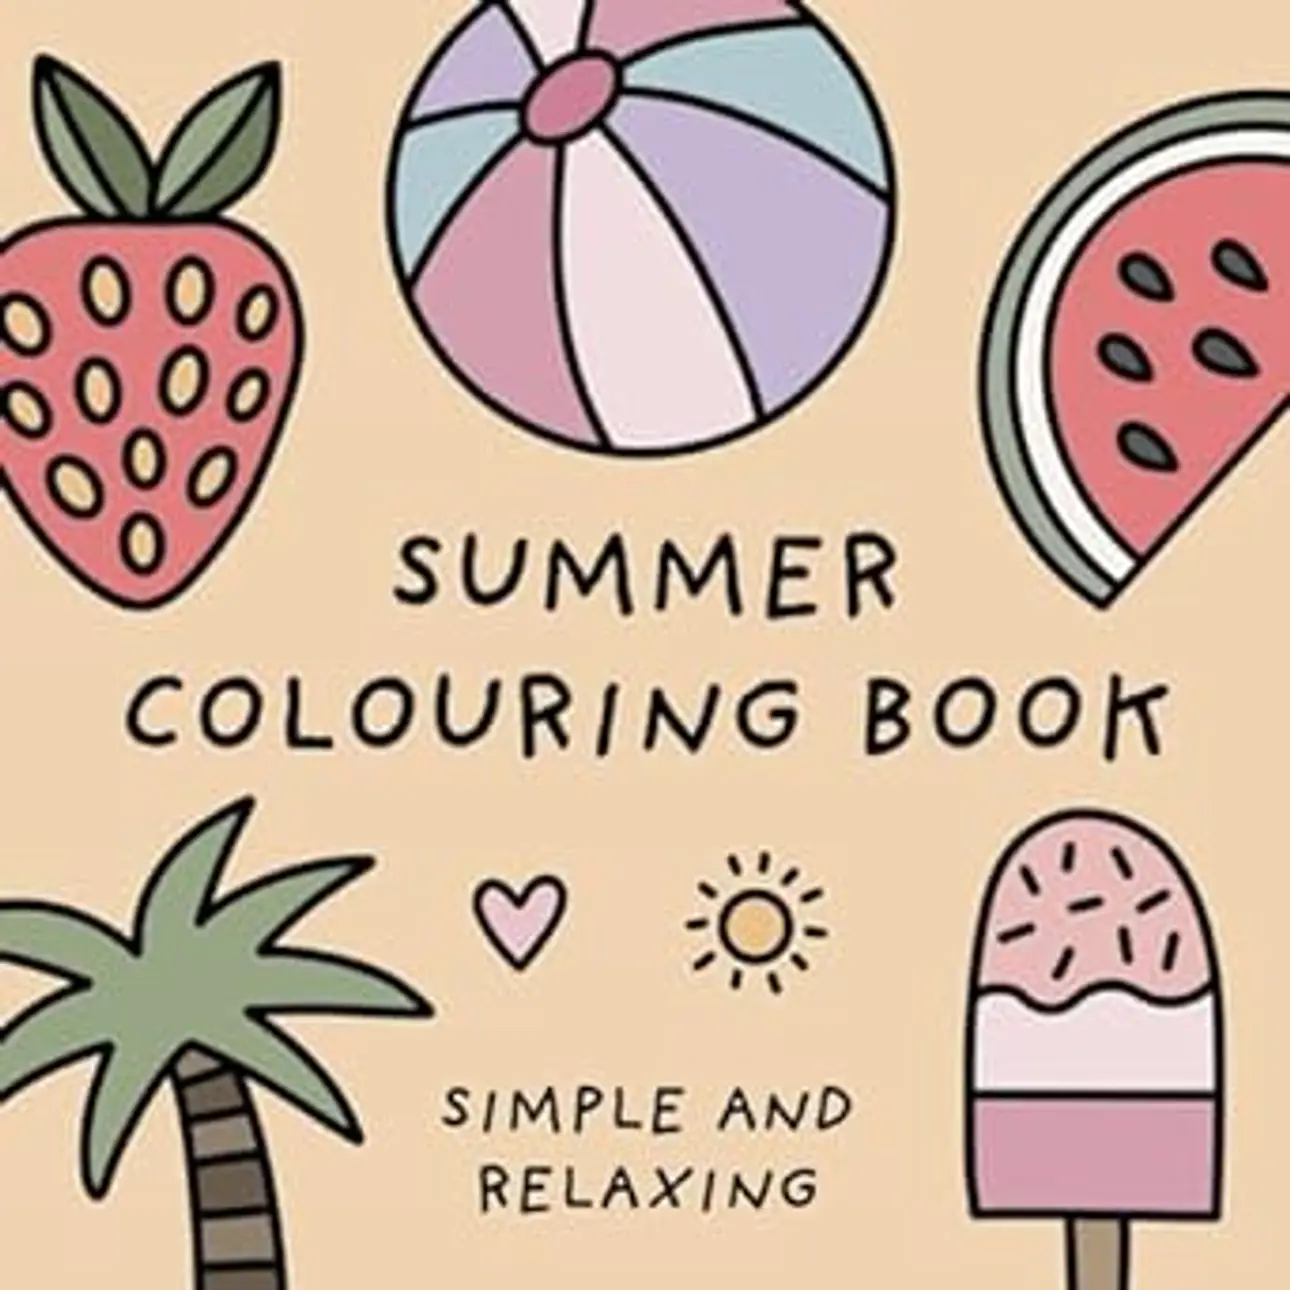 Summer Colouring Book (Simple and Relaxing Bold Designs for Adults & Children) (Simple and Relaxing Colouring Books) : Design Studio, Mary Hart, Hart, Mary: Amazon.de: Bücher